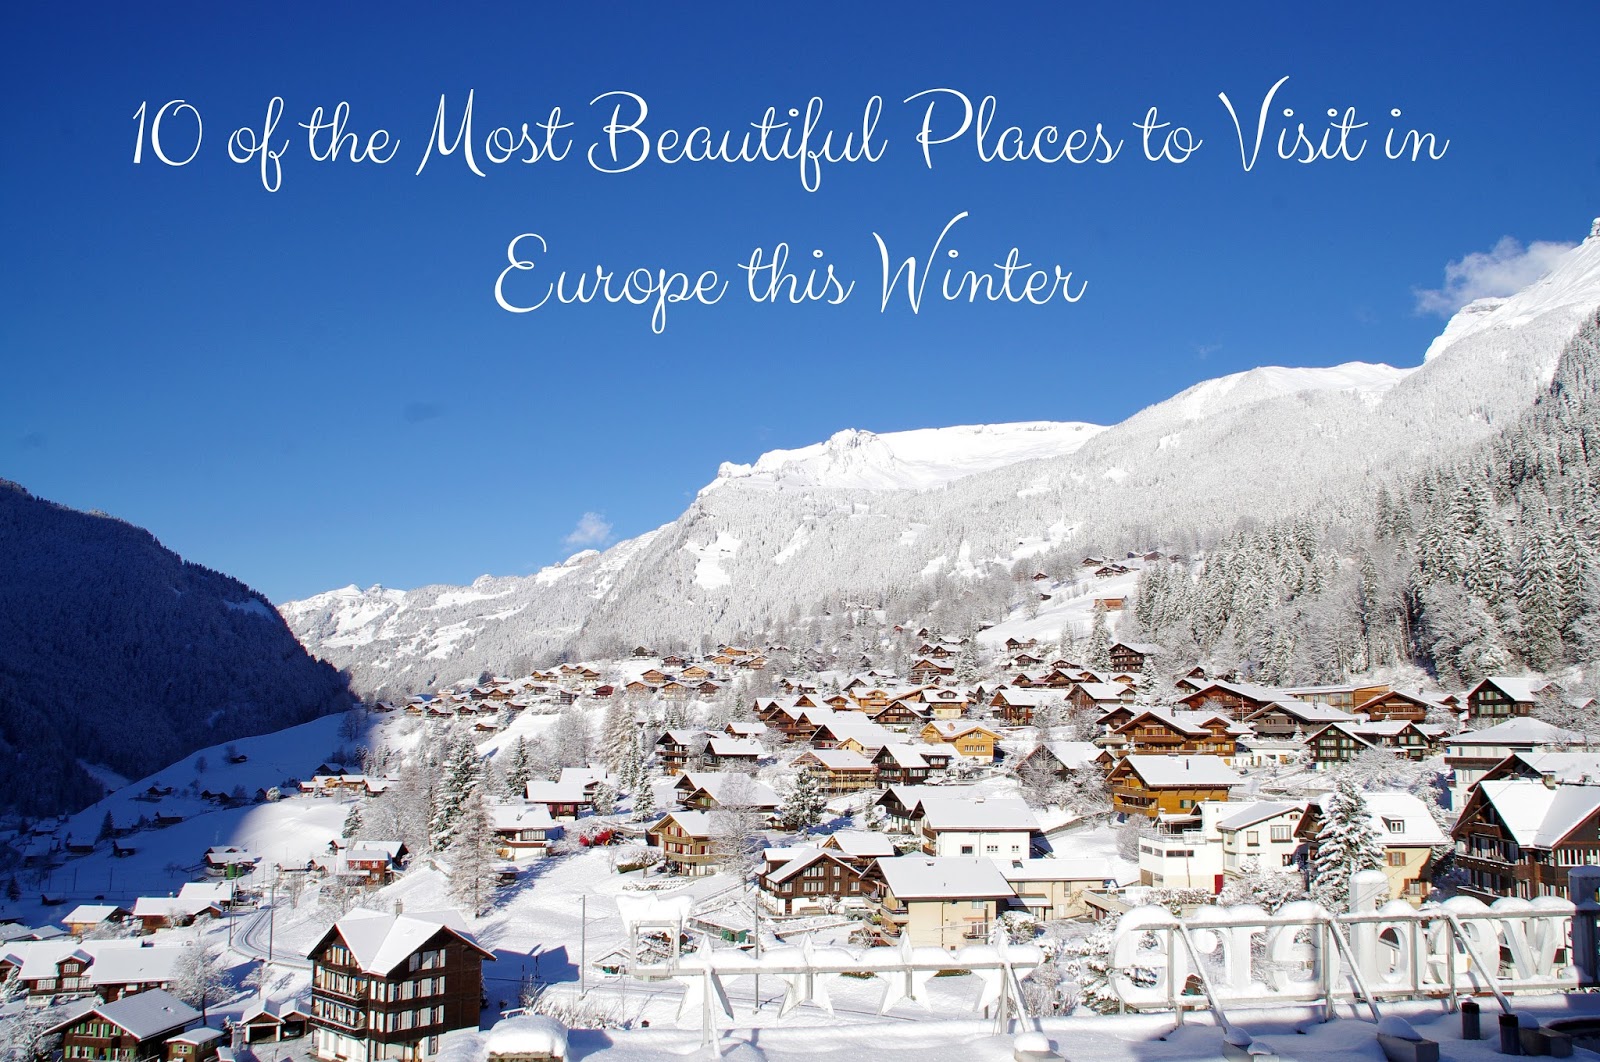 10 of the Most Beautiful Places to Visit in Europe this Winter - The